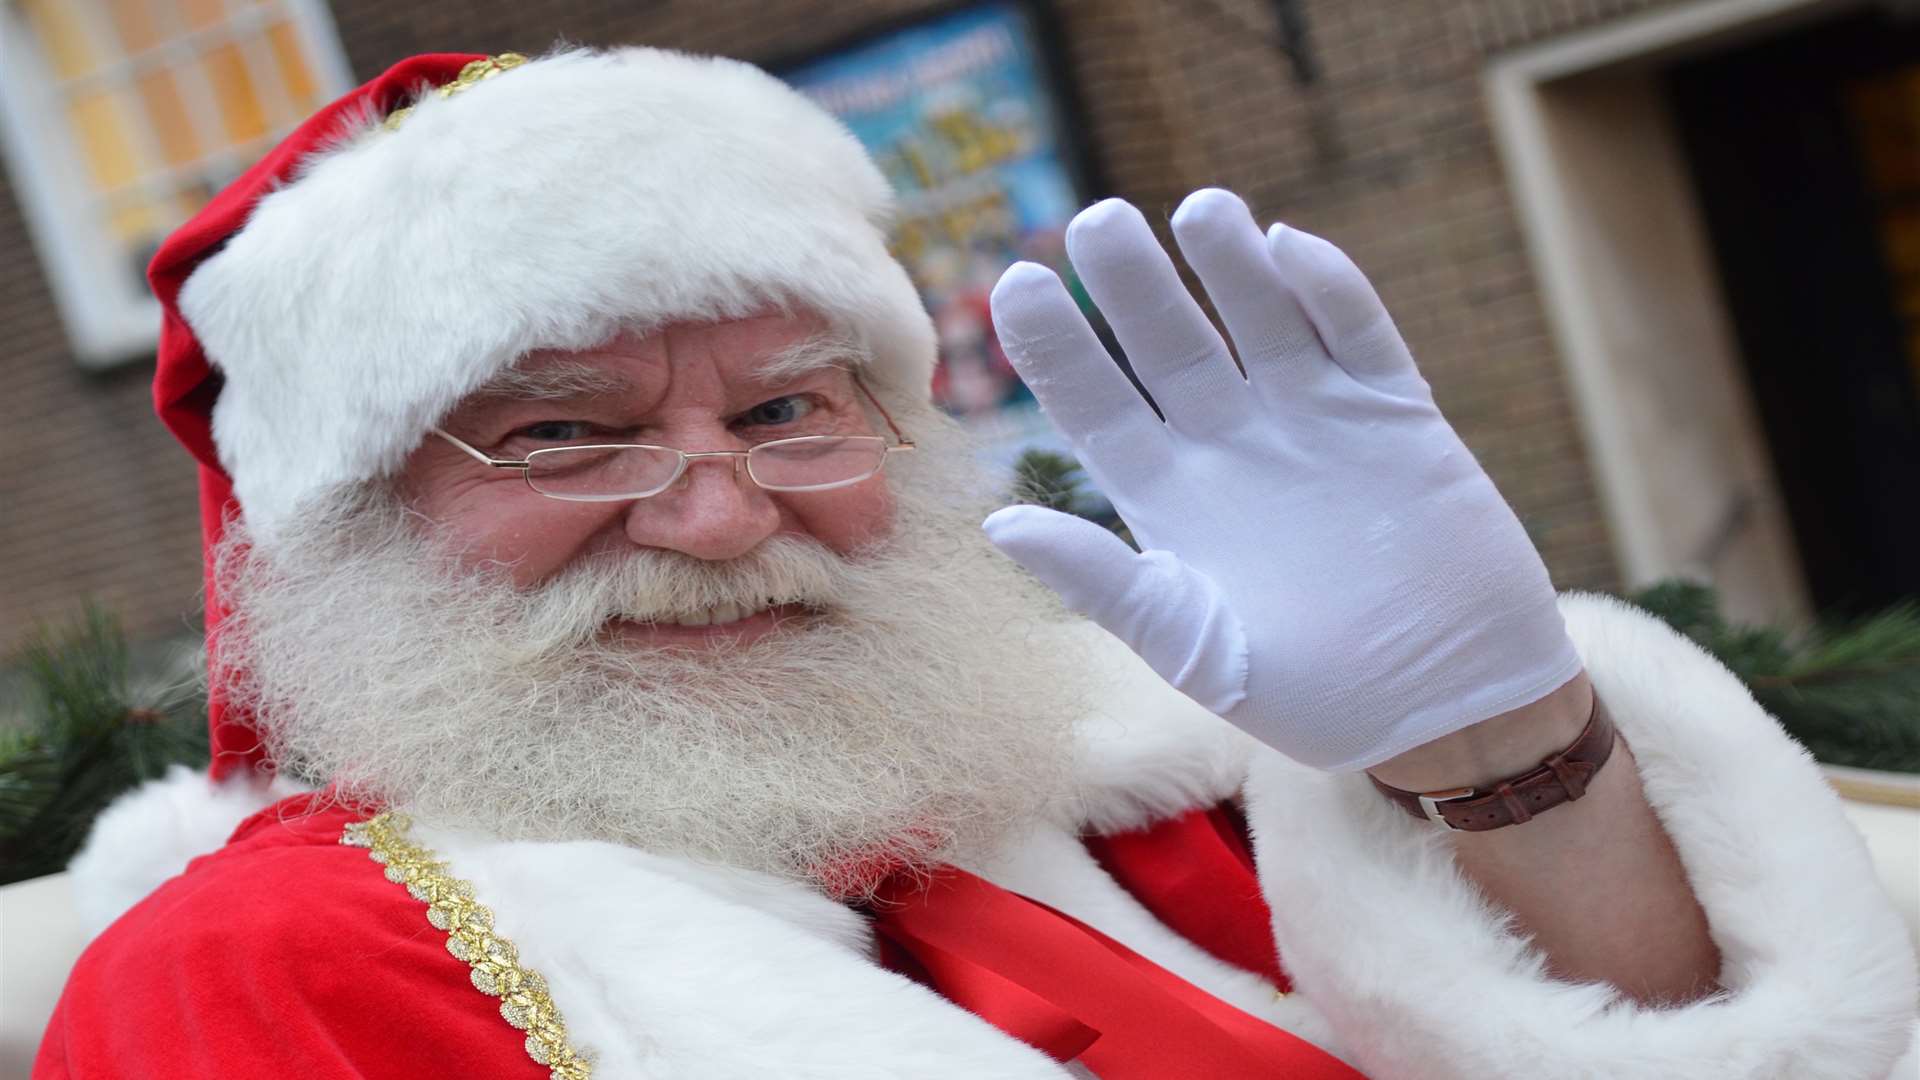 Father Christmas waves to the crowds as he makes his way to the Royal Victoria Place